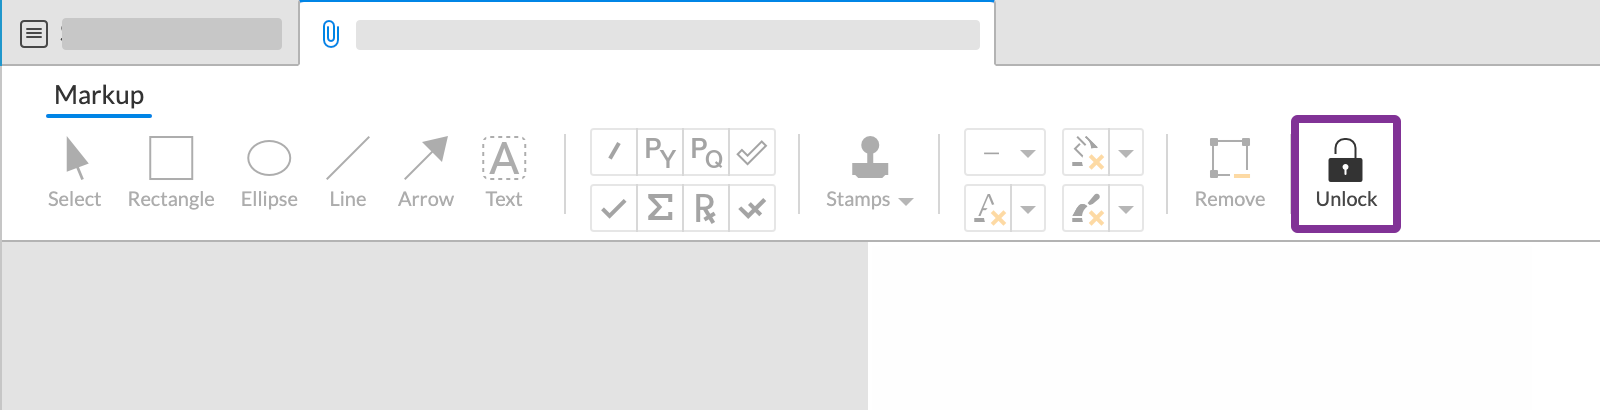 unlock edits icon in the markup viewer toolbar